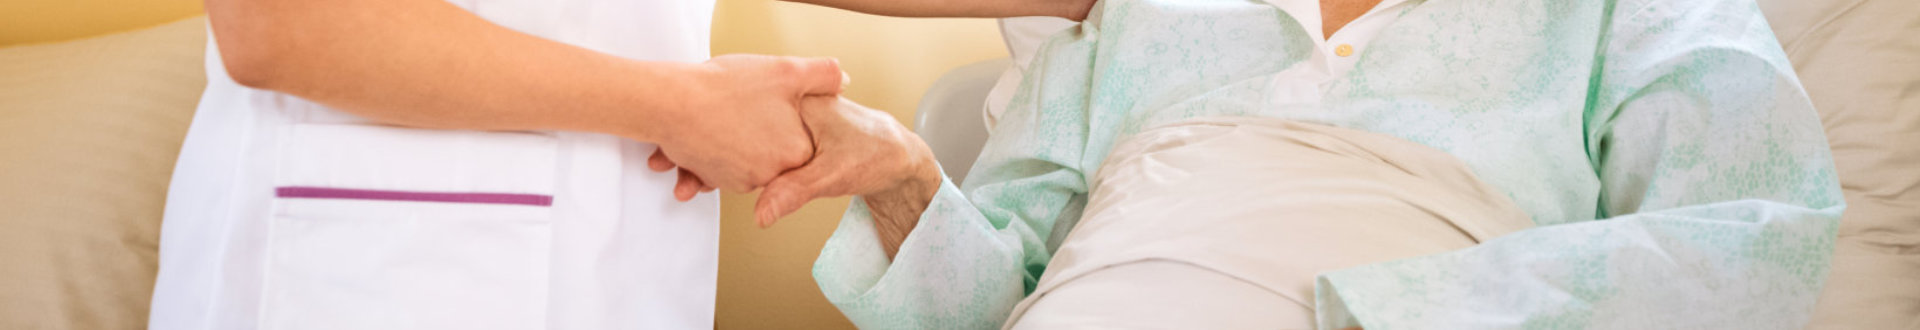 caregiver and senior woman holding hands